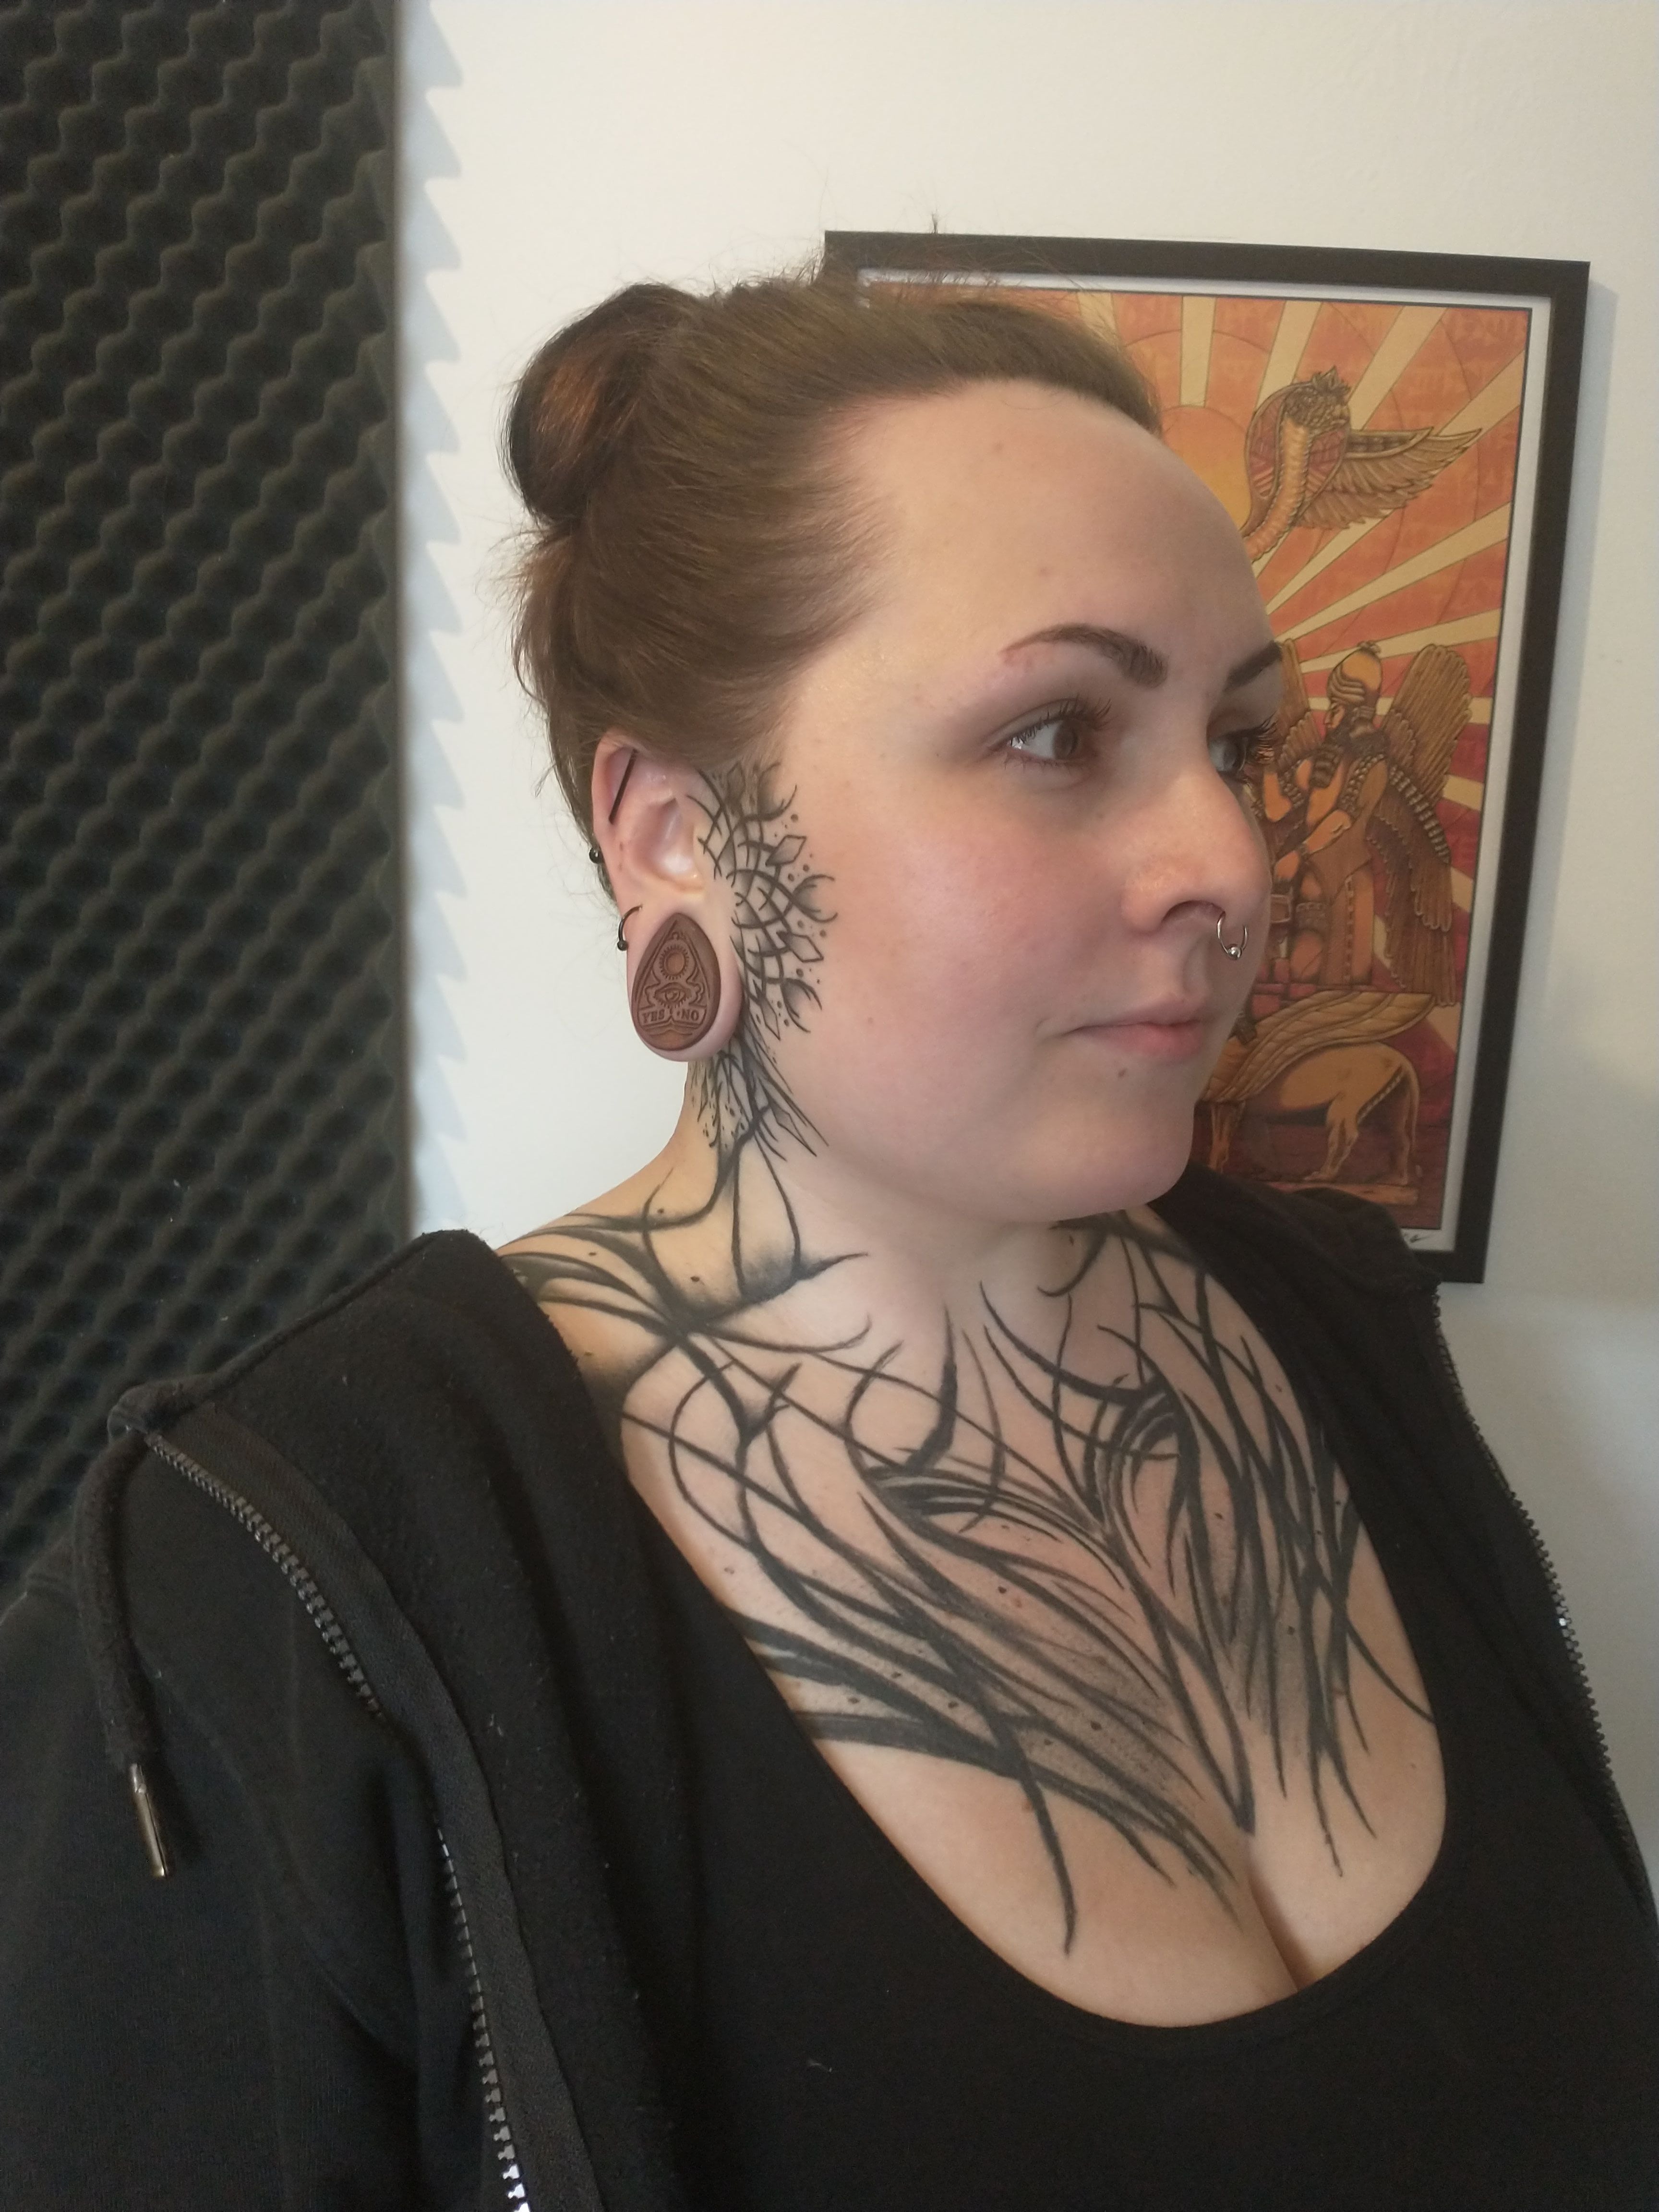 The rise of jobstoppers: should face tattoos be banned?, Tattoos